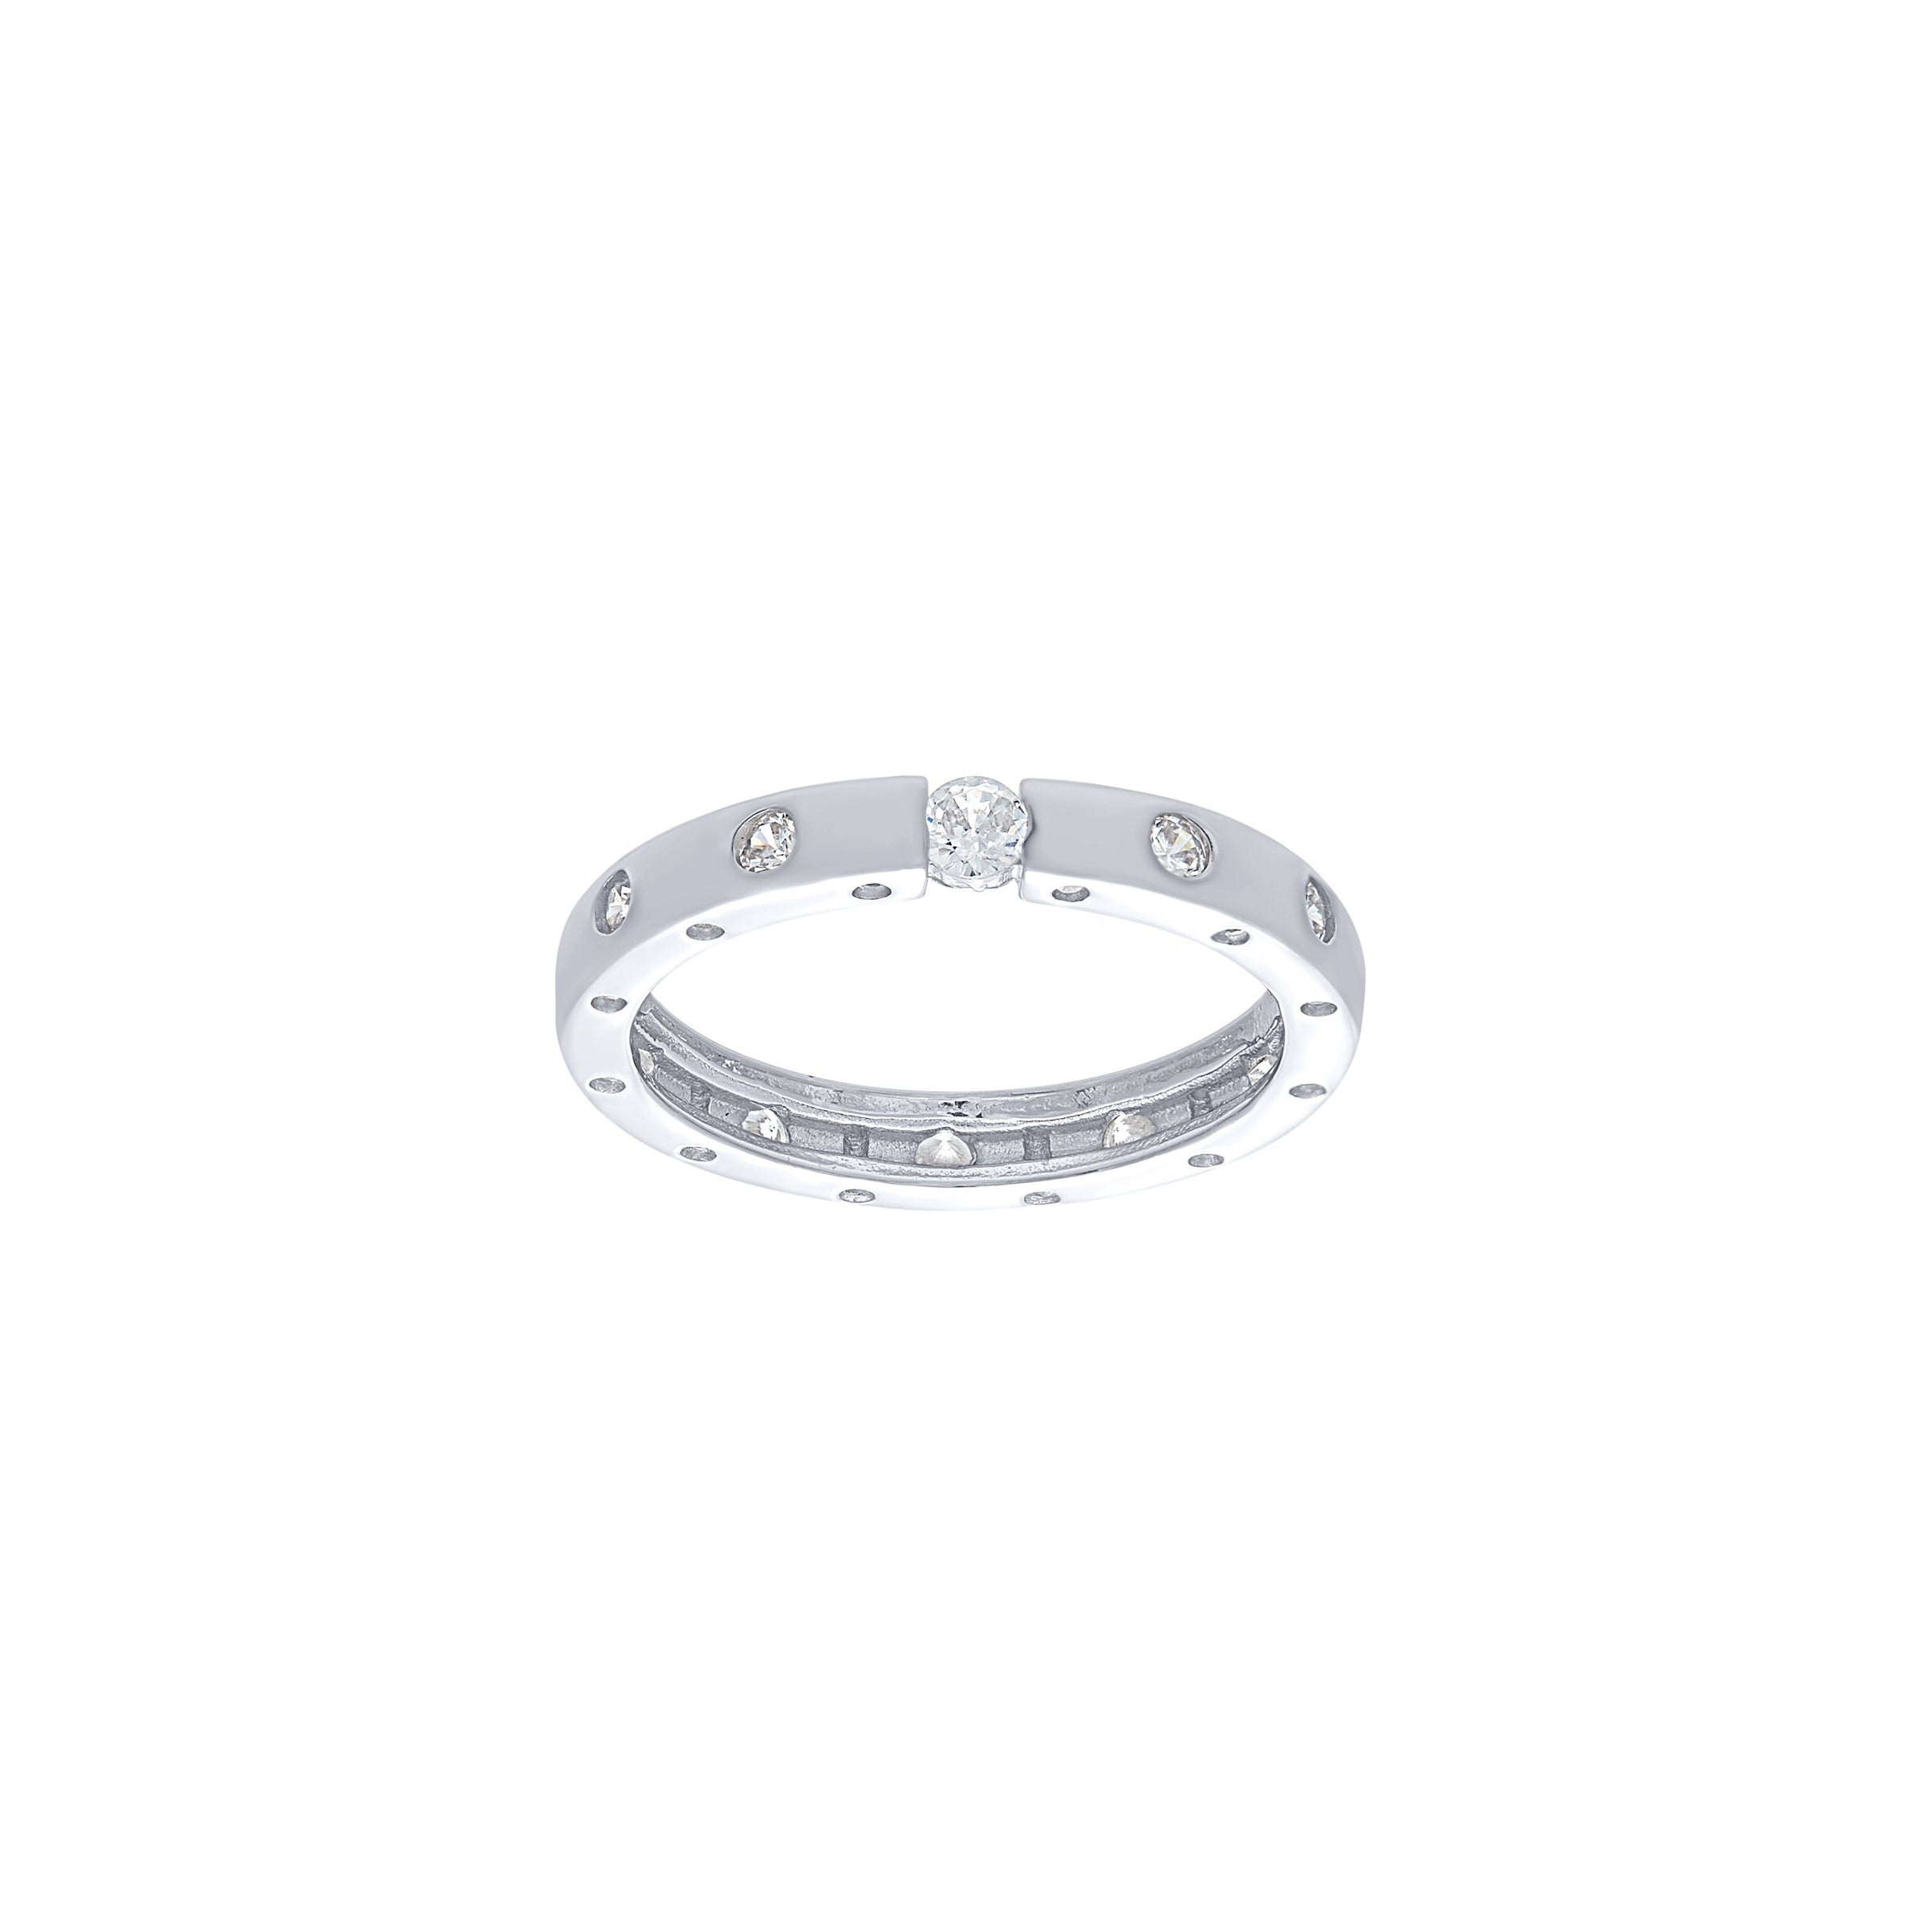 Flush Set Ring with Cubic Zirconia in Sterling Silver Rings Bevilles 